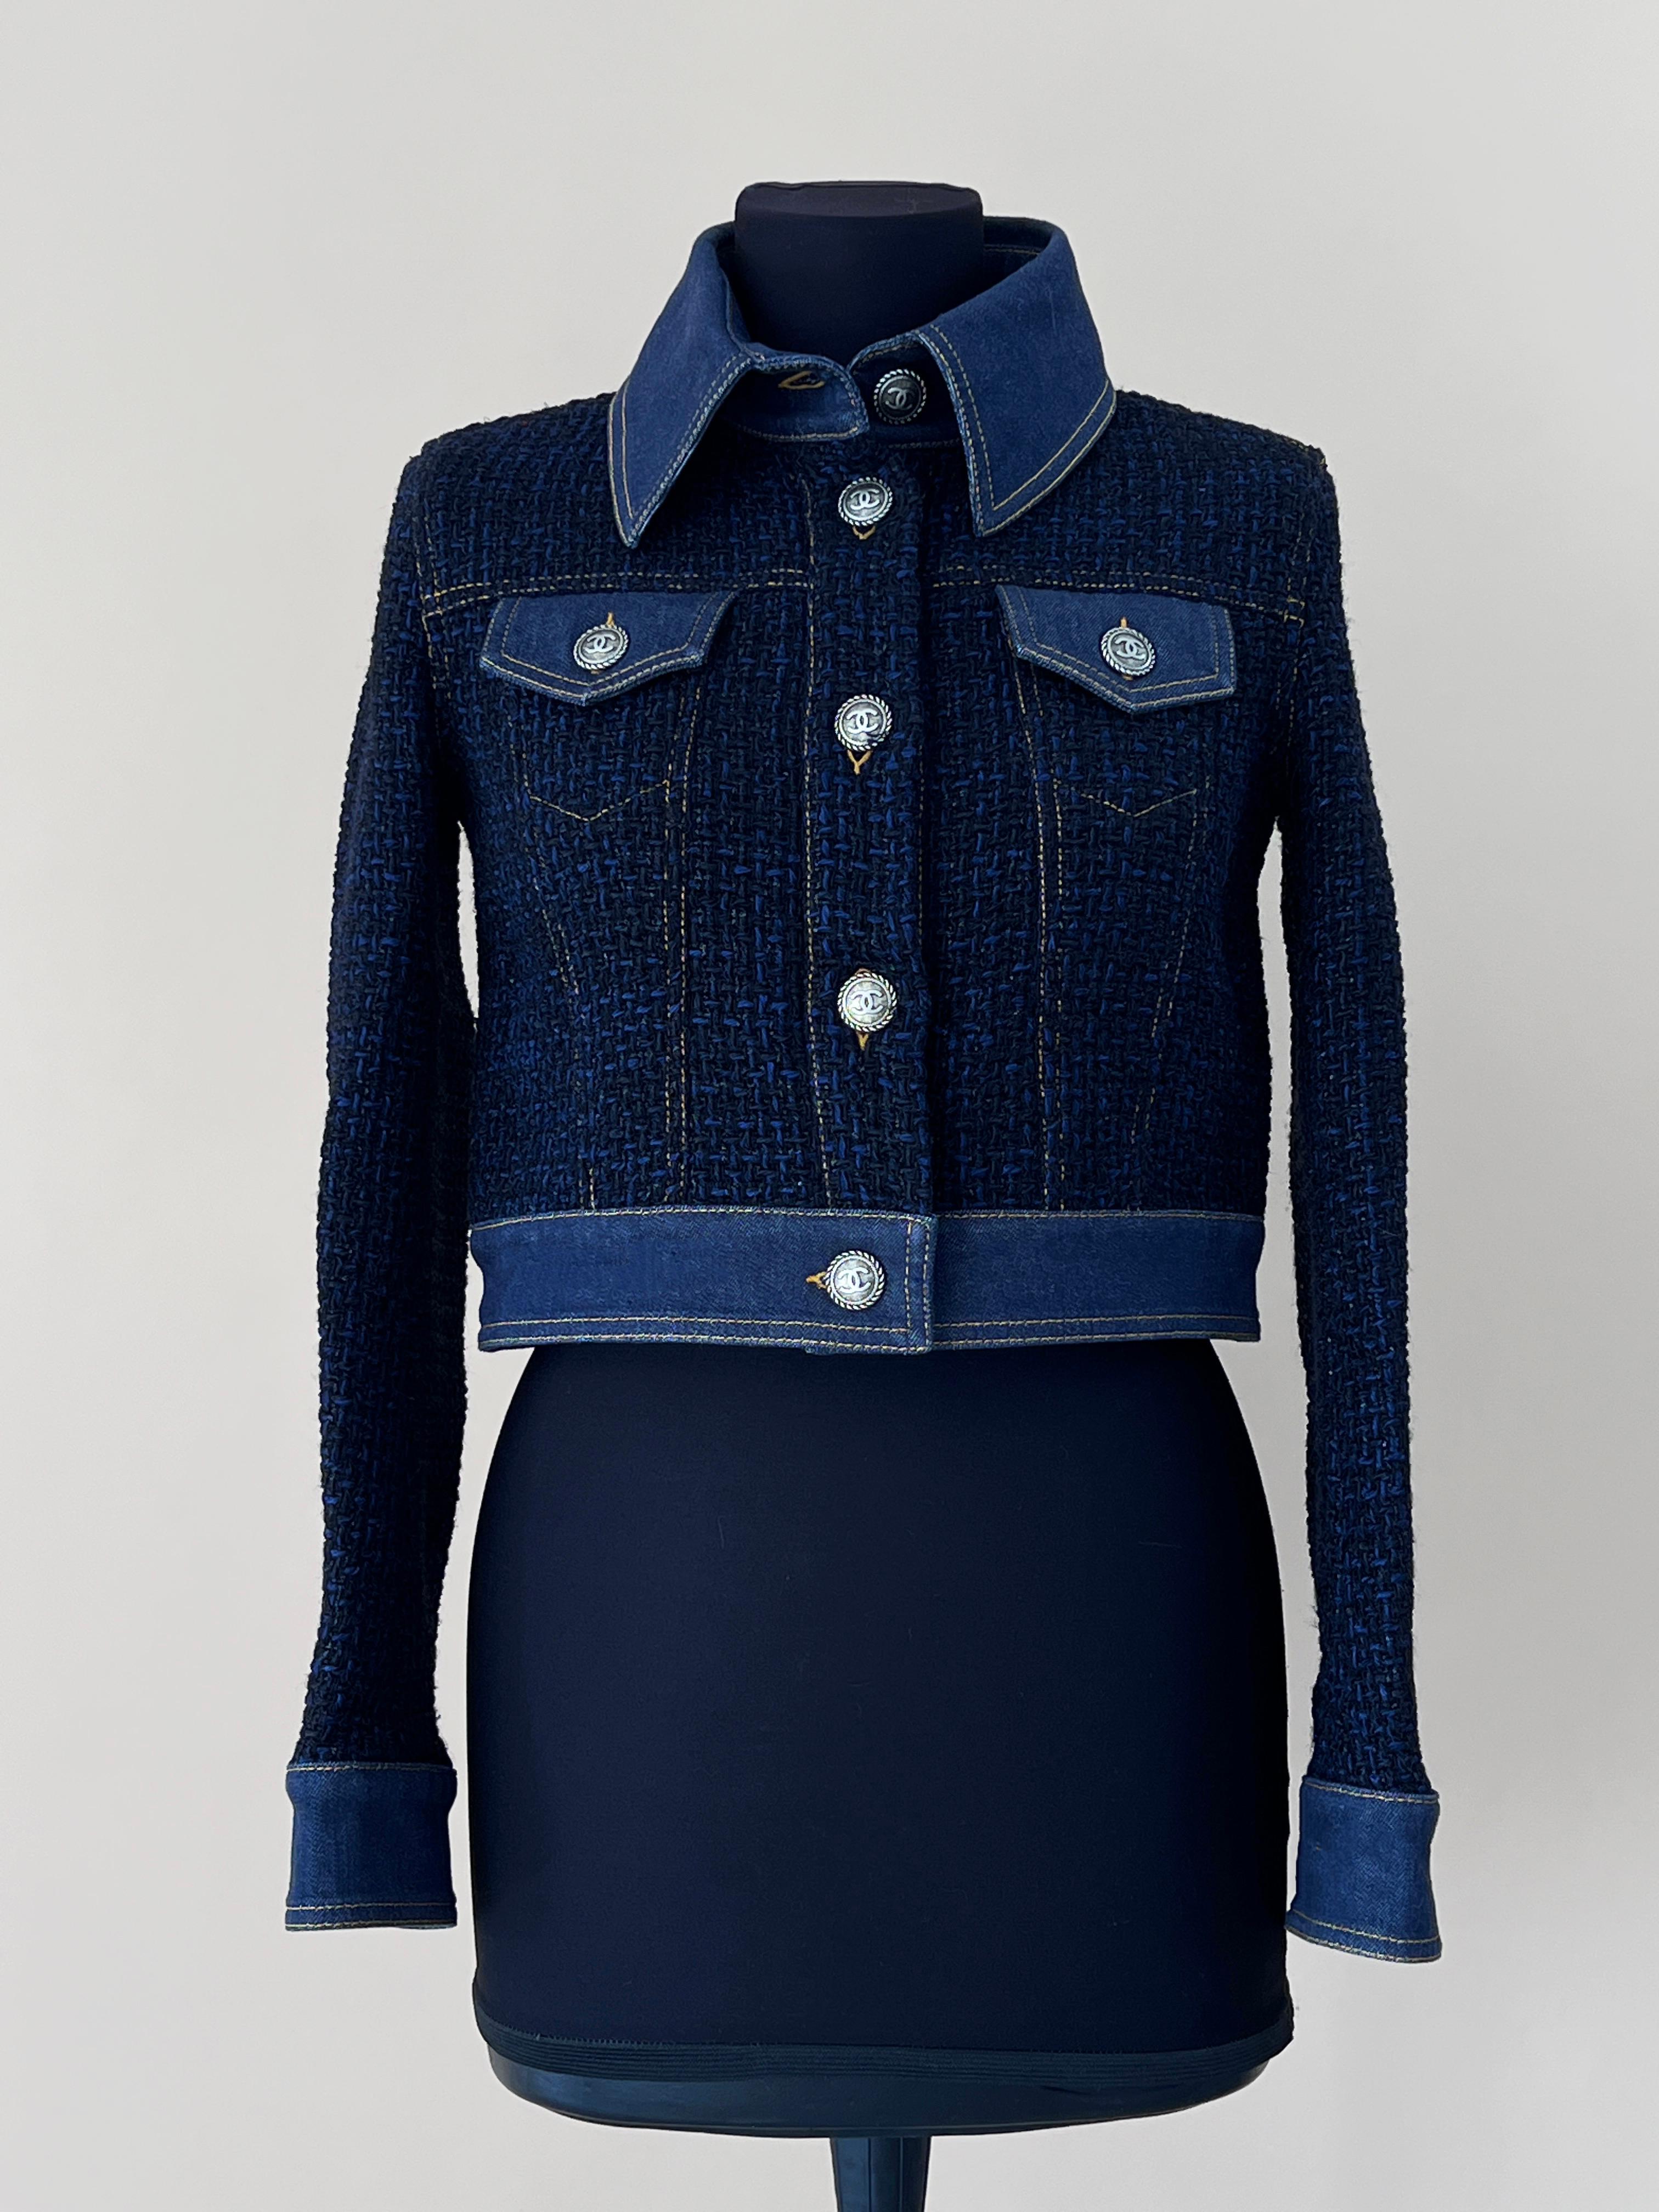 Chanel Must Have Ad Campaign Lesage Tweed Jacket For Sale 7